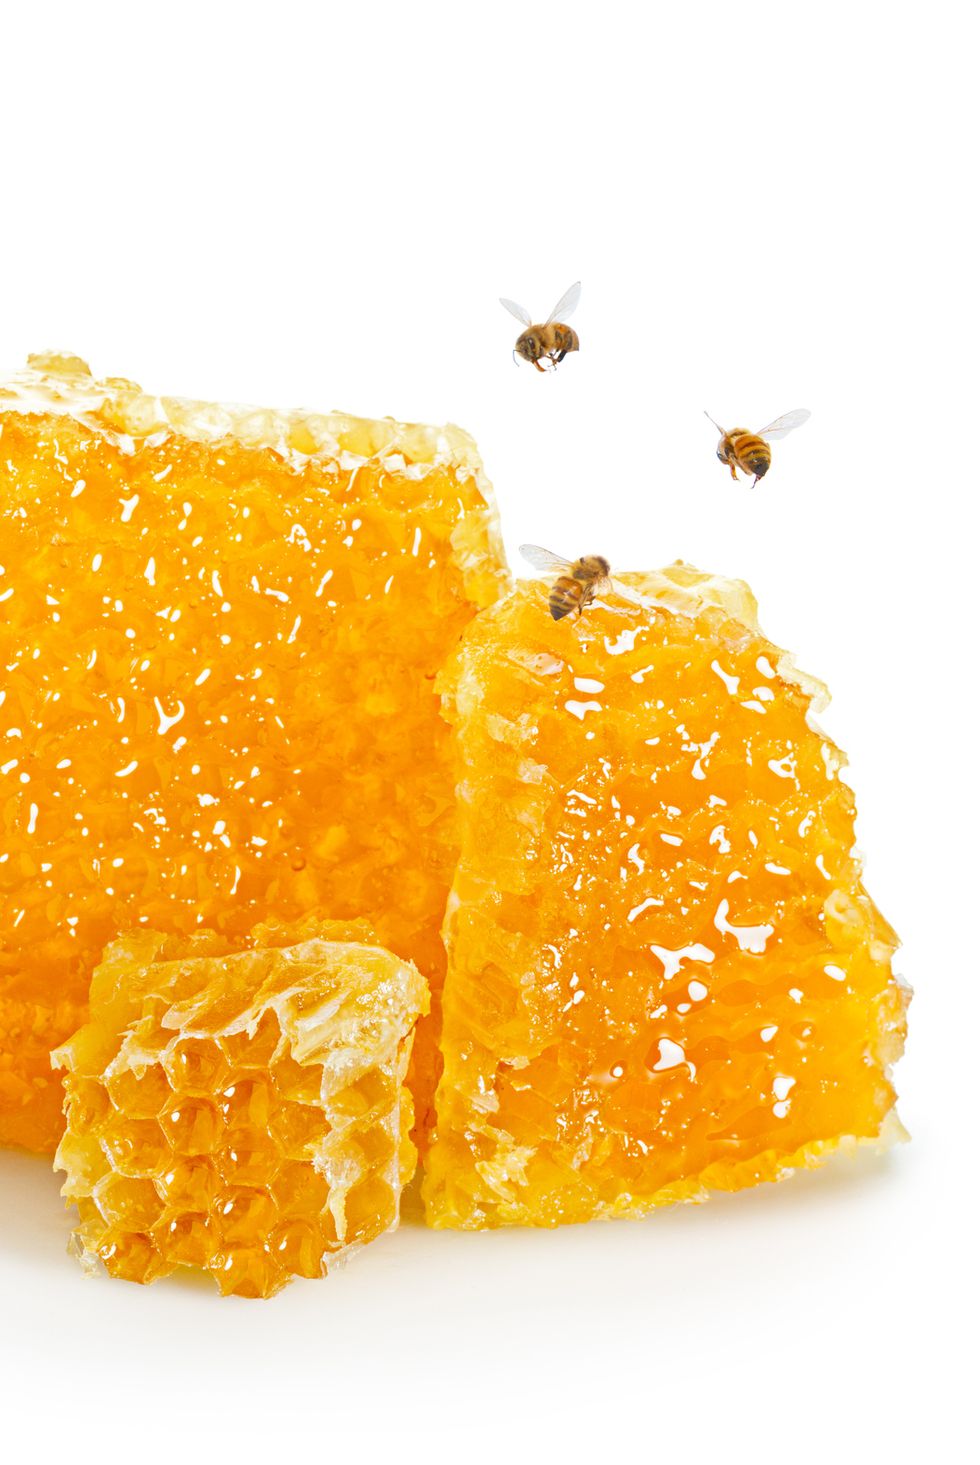 Close-Up Of Honeycomb Against White Background